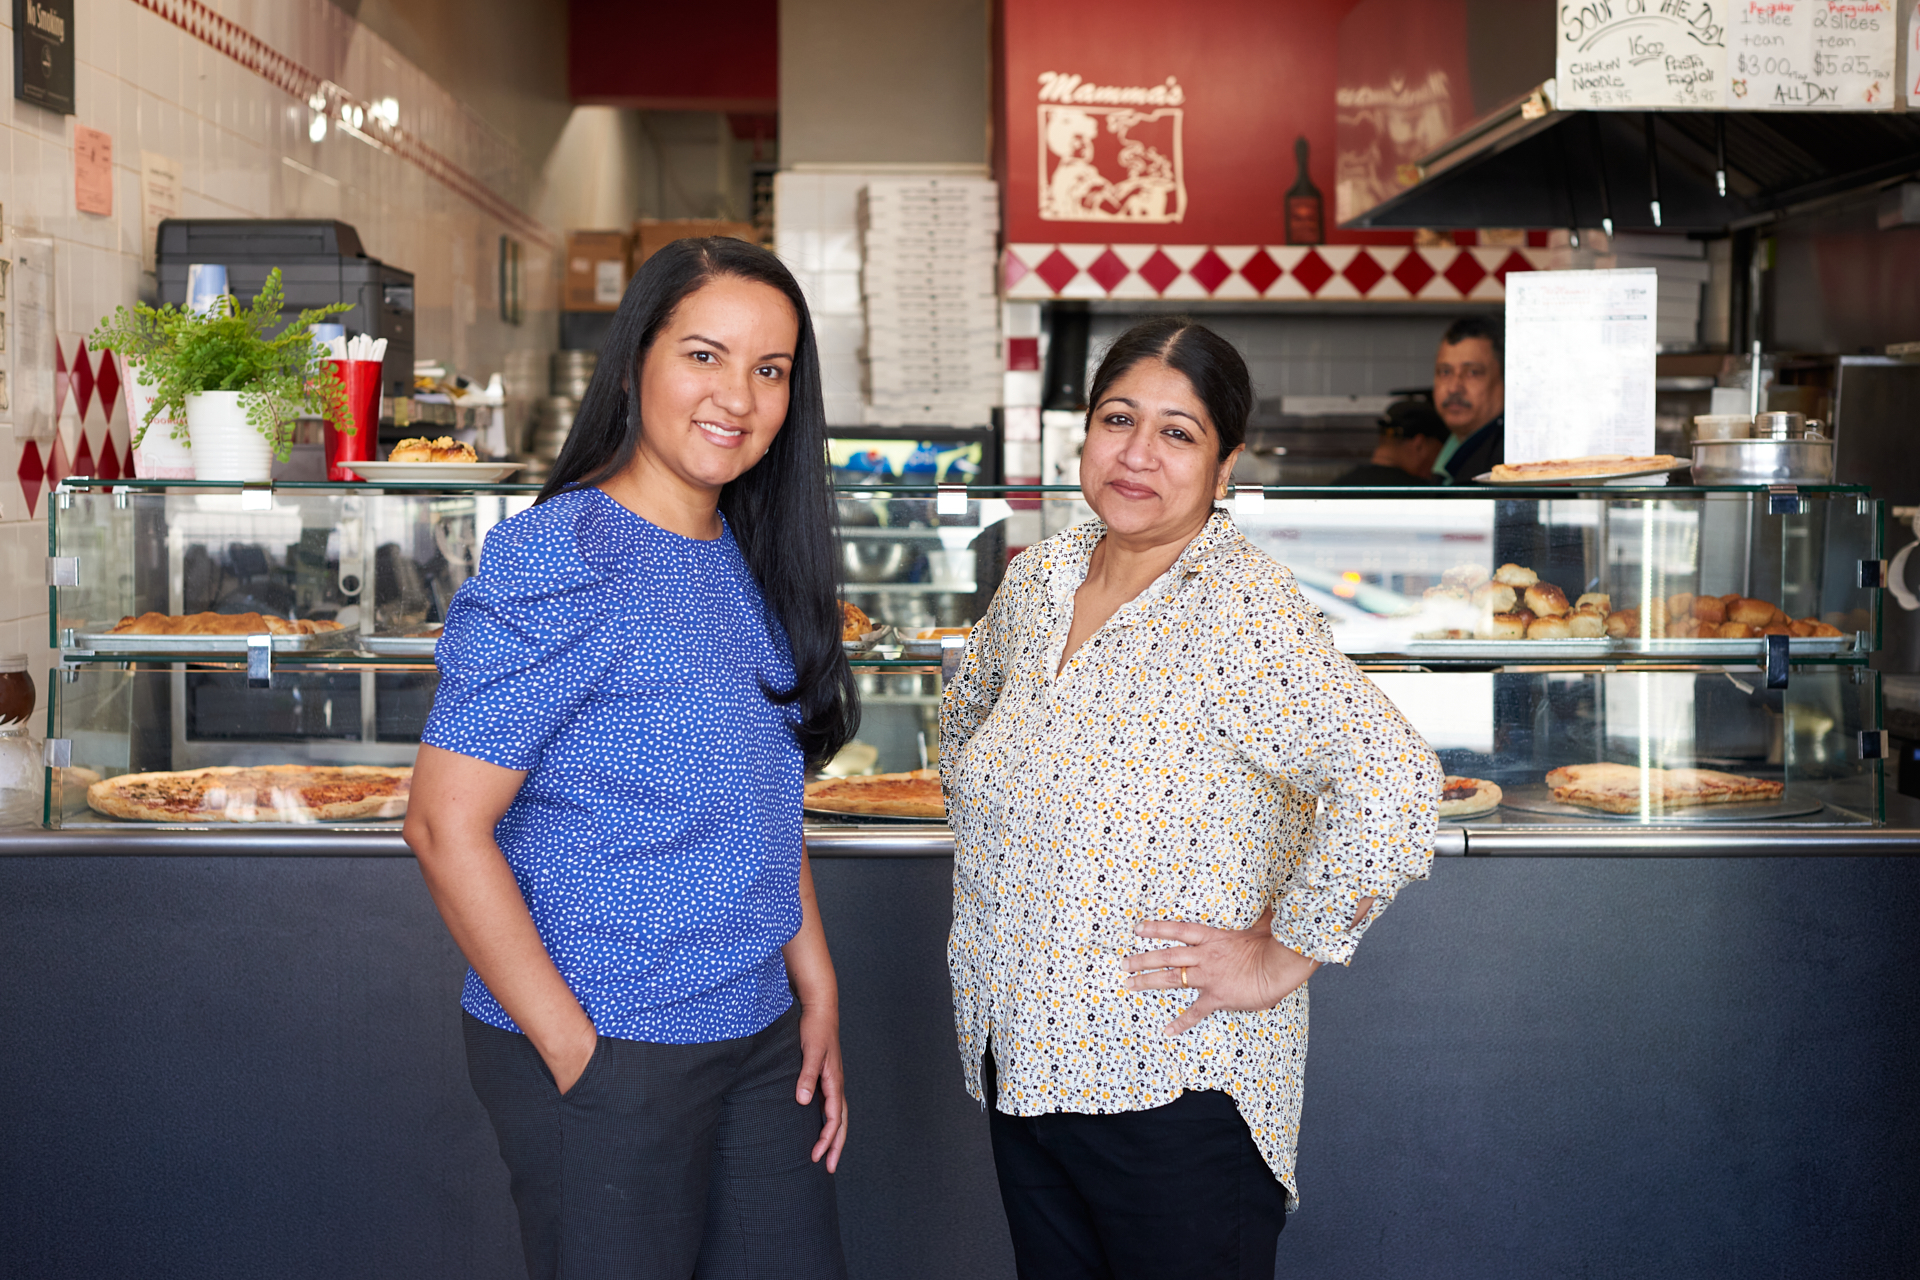 A Queens Small Business Grant helped Mamma's Pizza in Queens